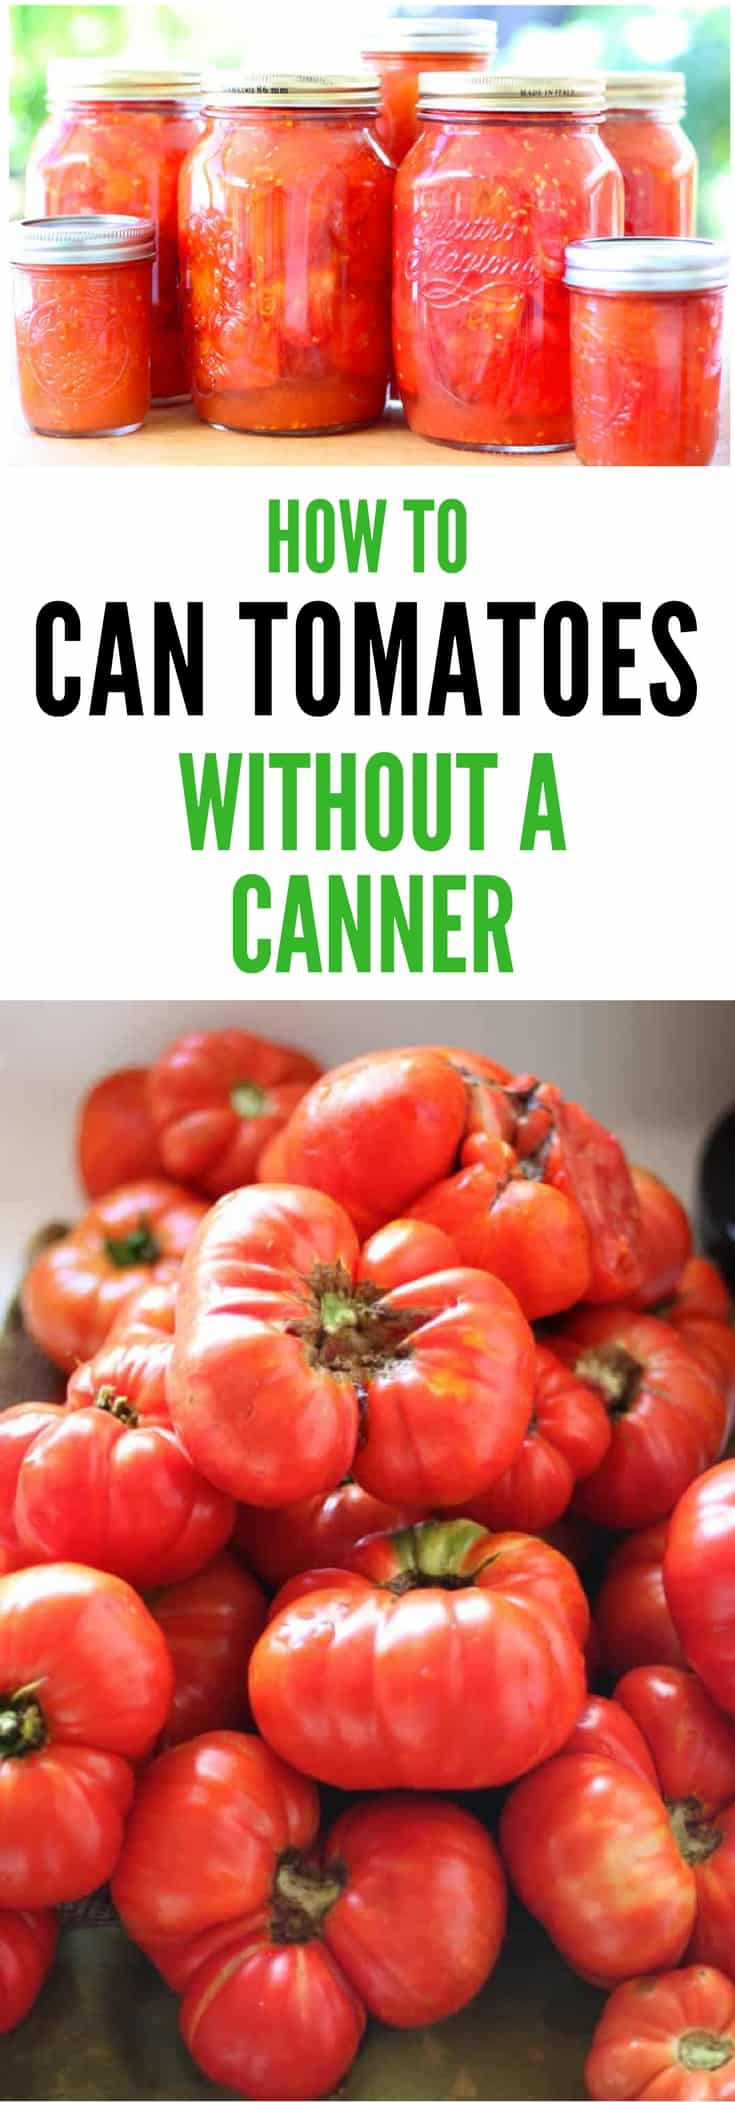 Image of canned tomatoes